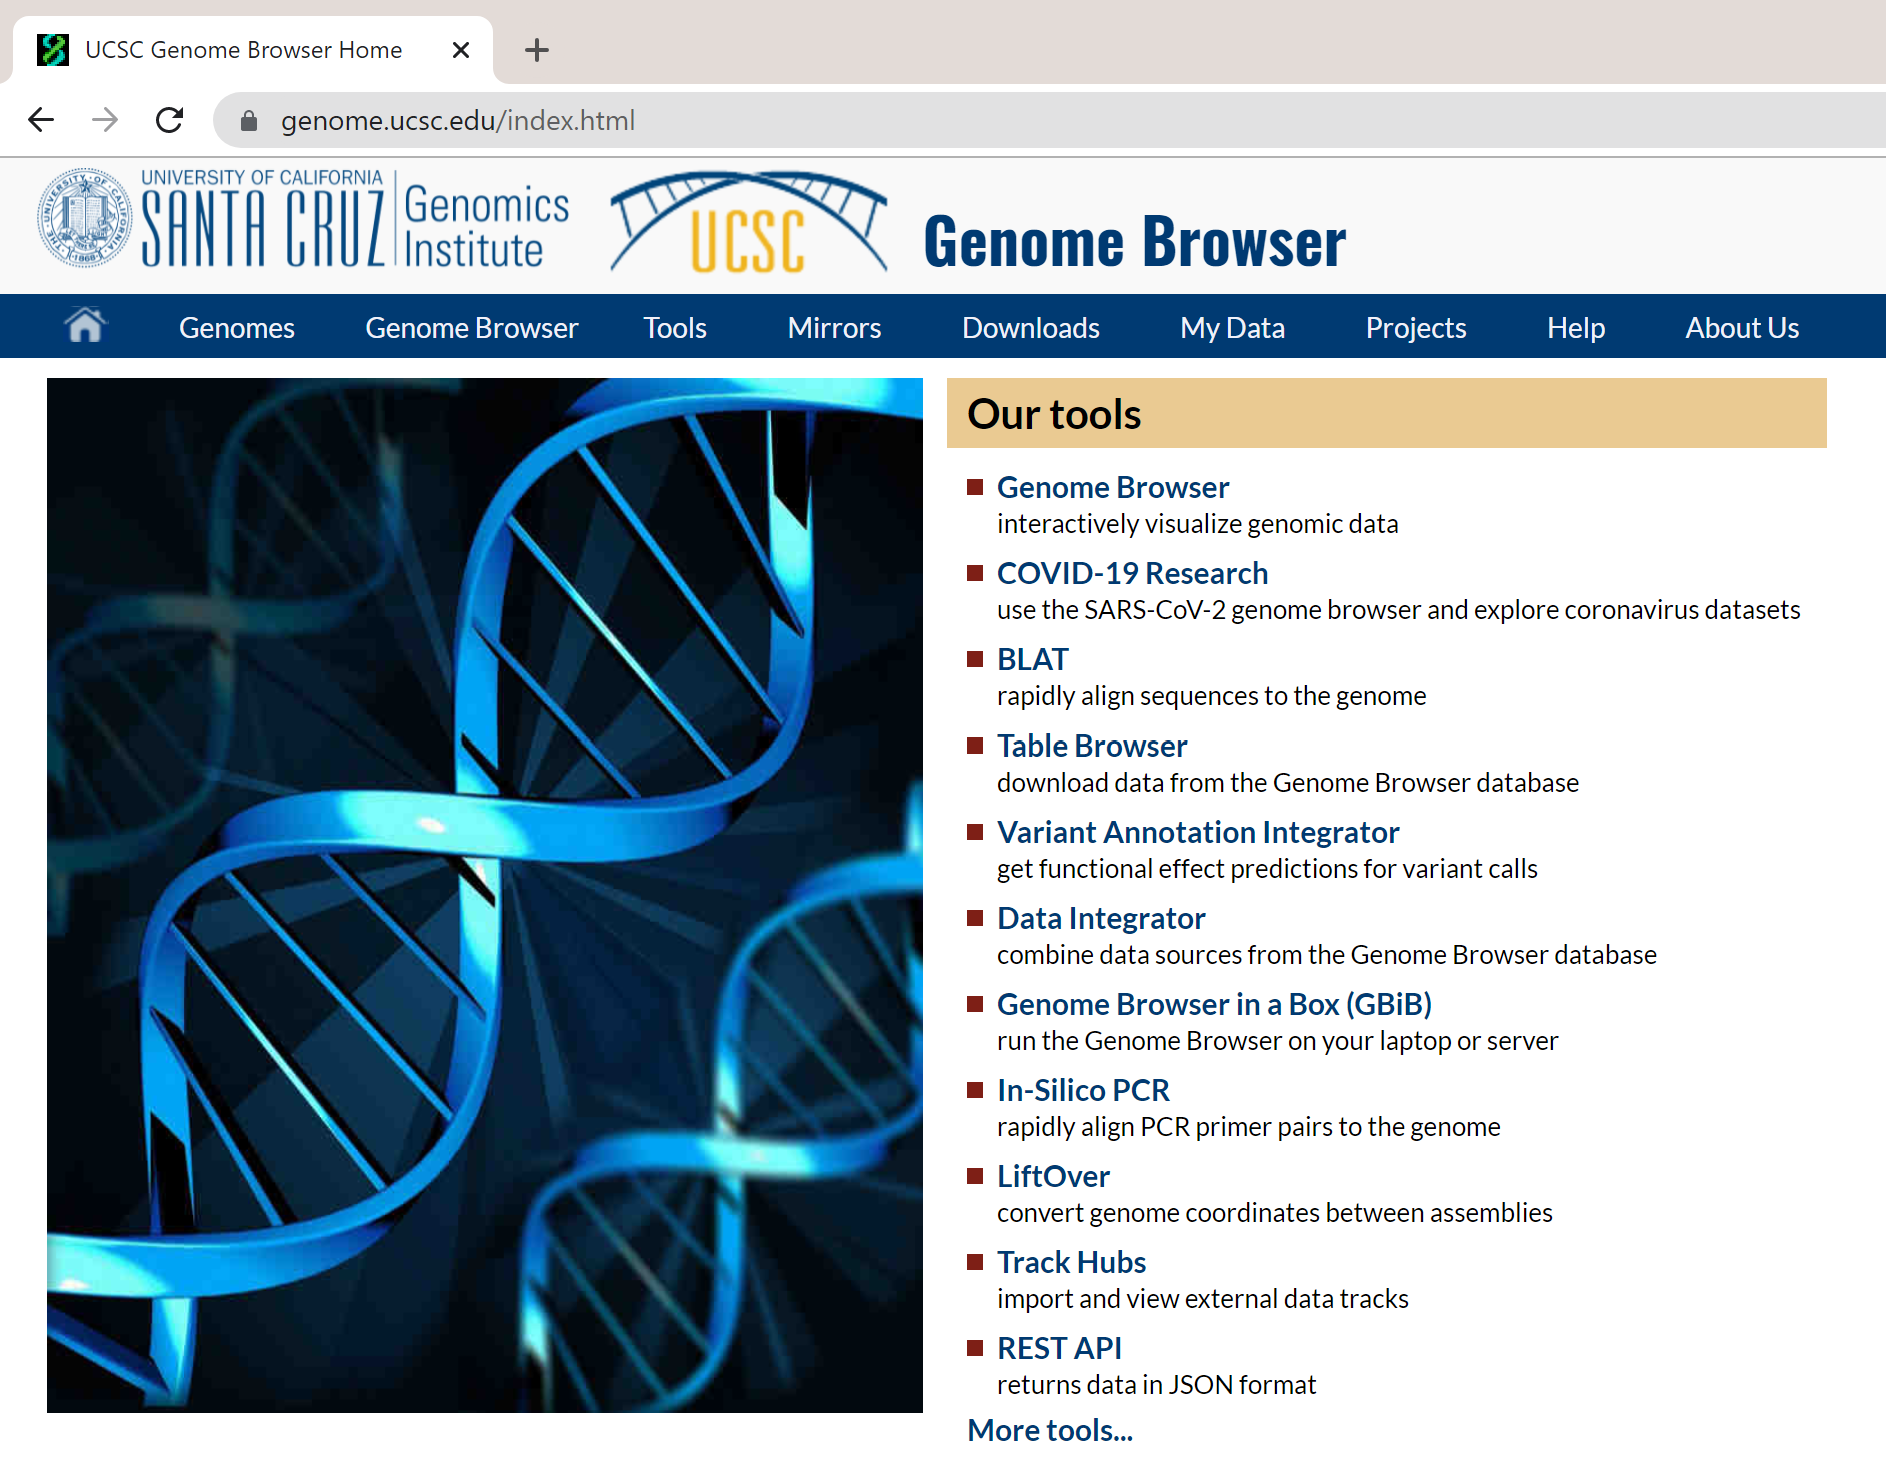 The Genome Browser website